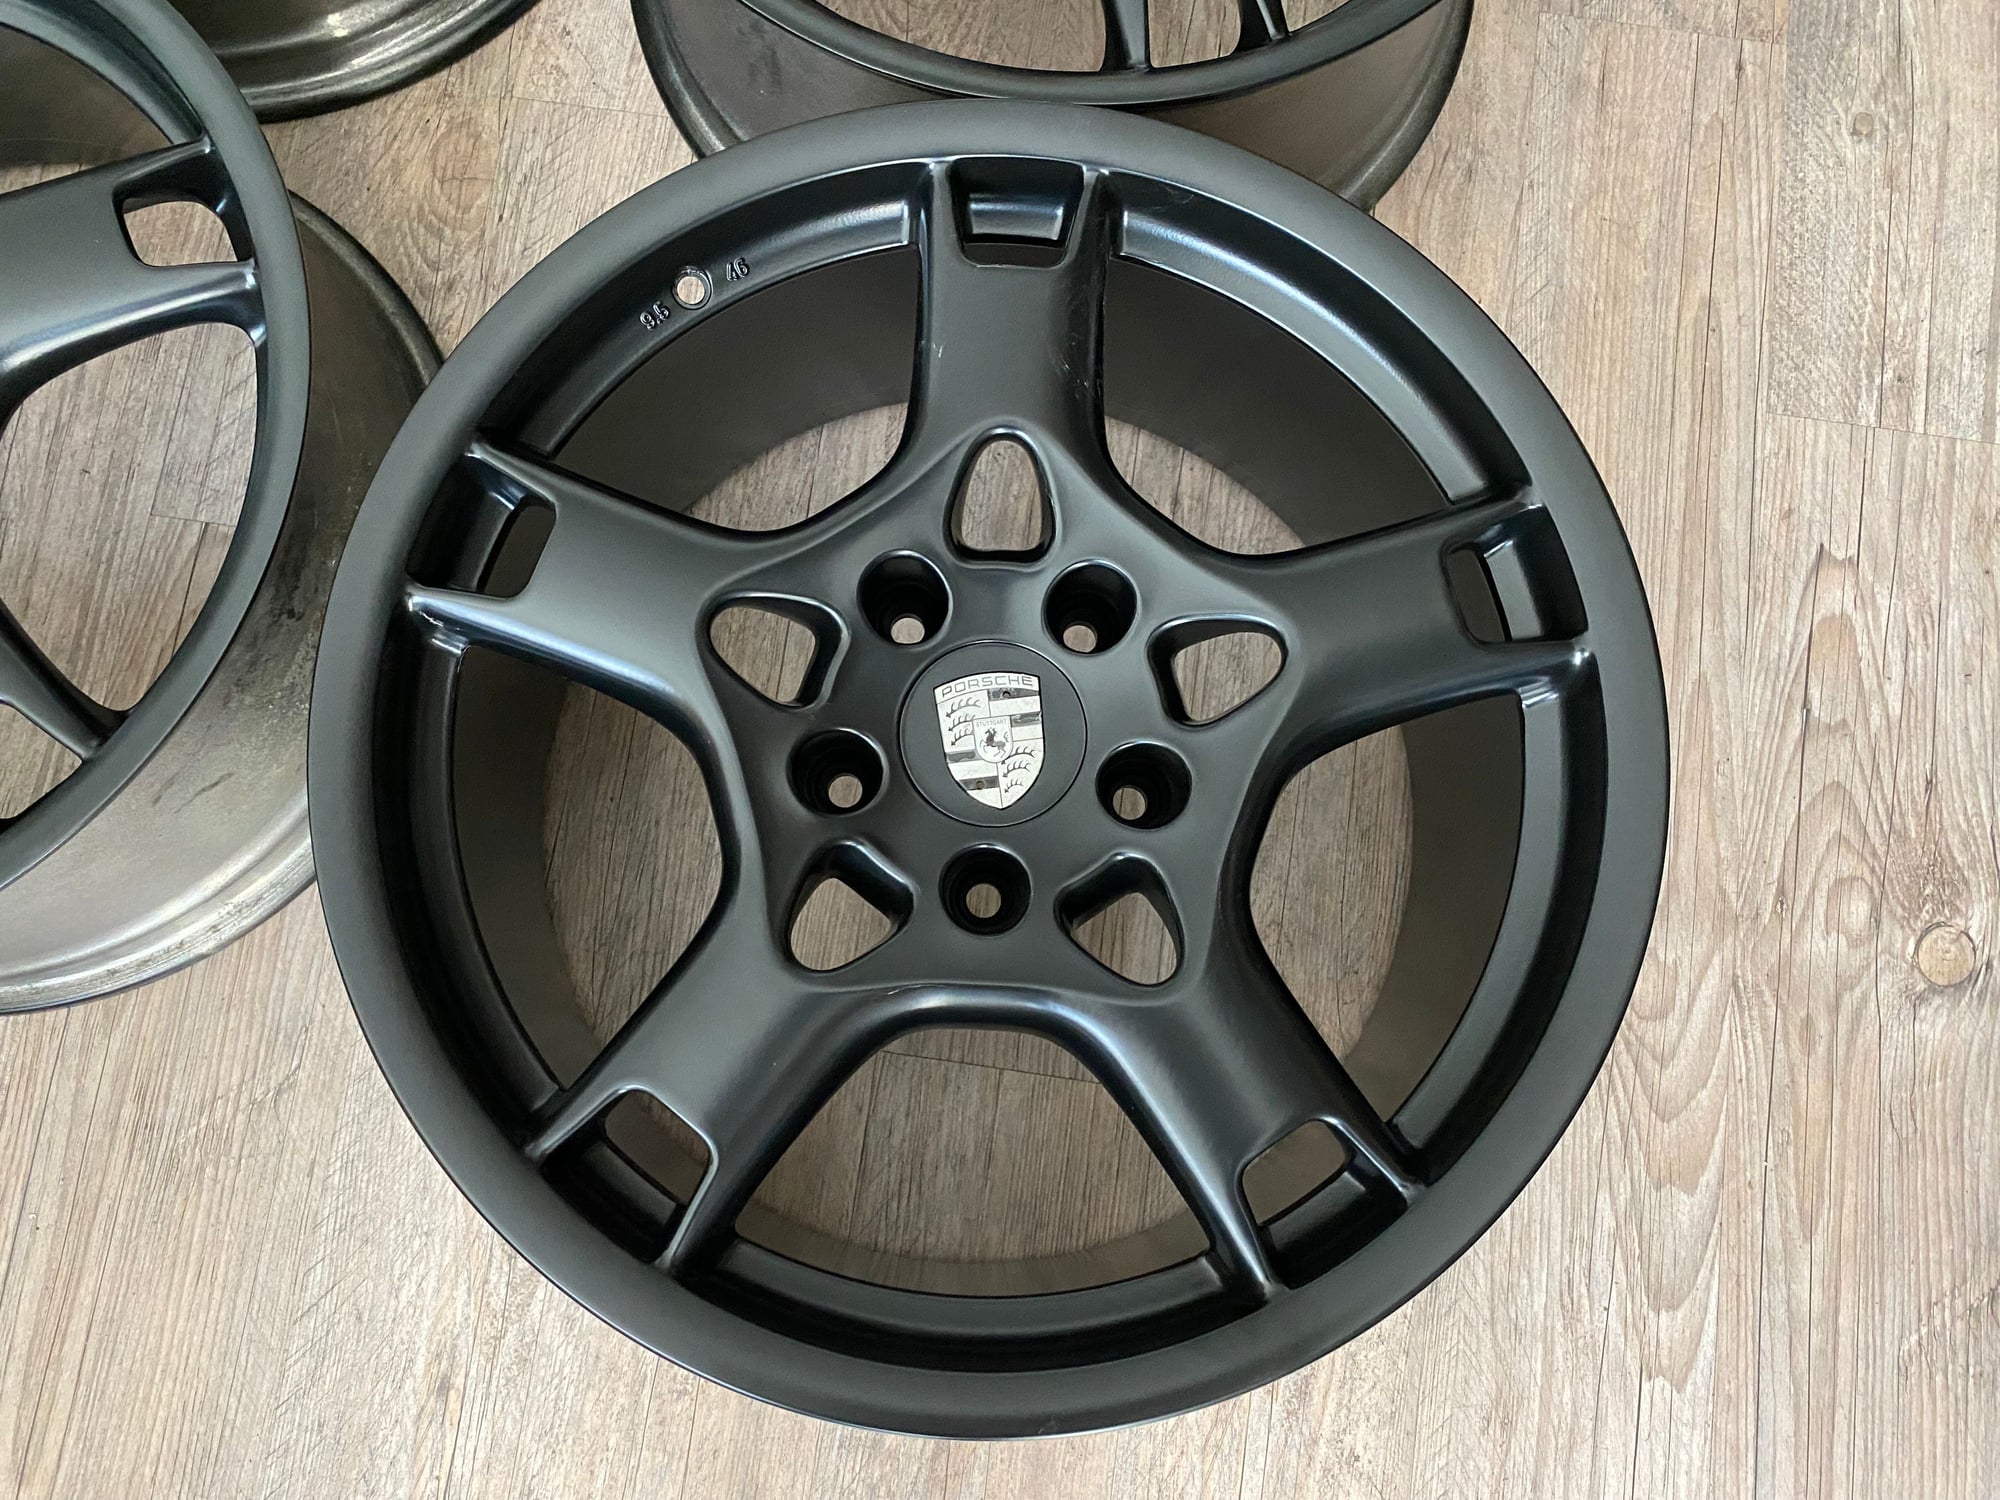 Wheels and Tires/Axles - Porsche 987/997 Black OEM Lobster Claw Wheels Set of 4 19" Satin Black - Used - 0  All Models - Dallas, TX 75231, United States